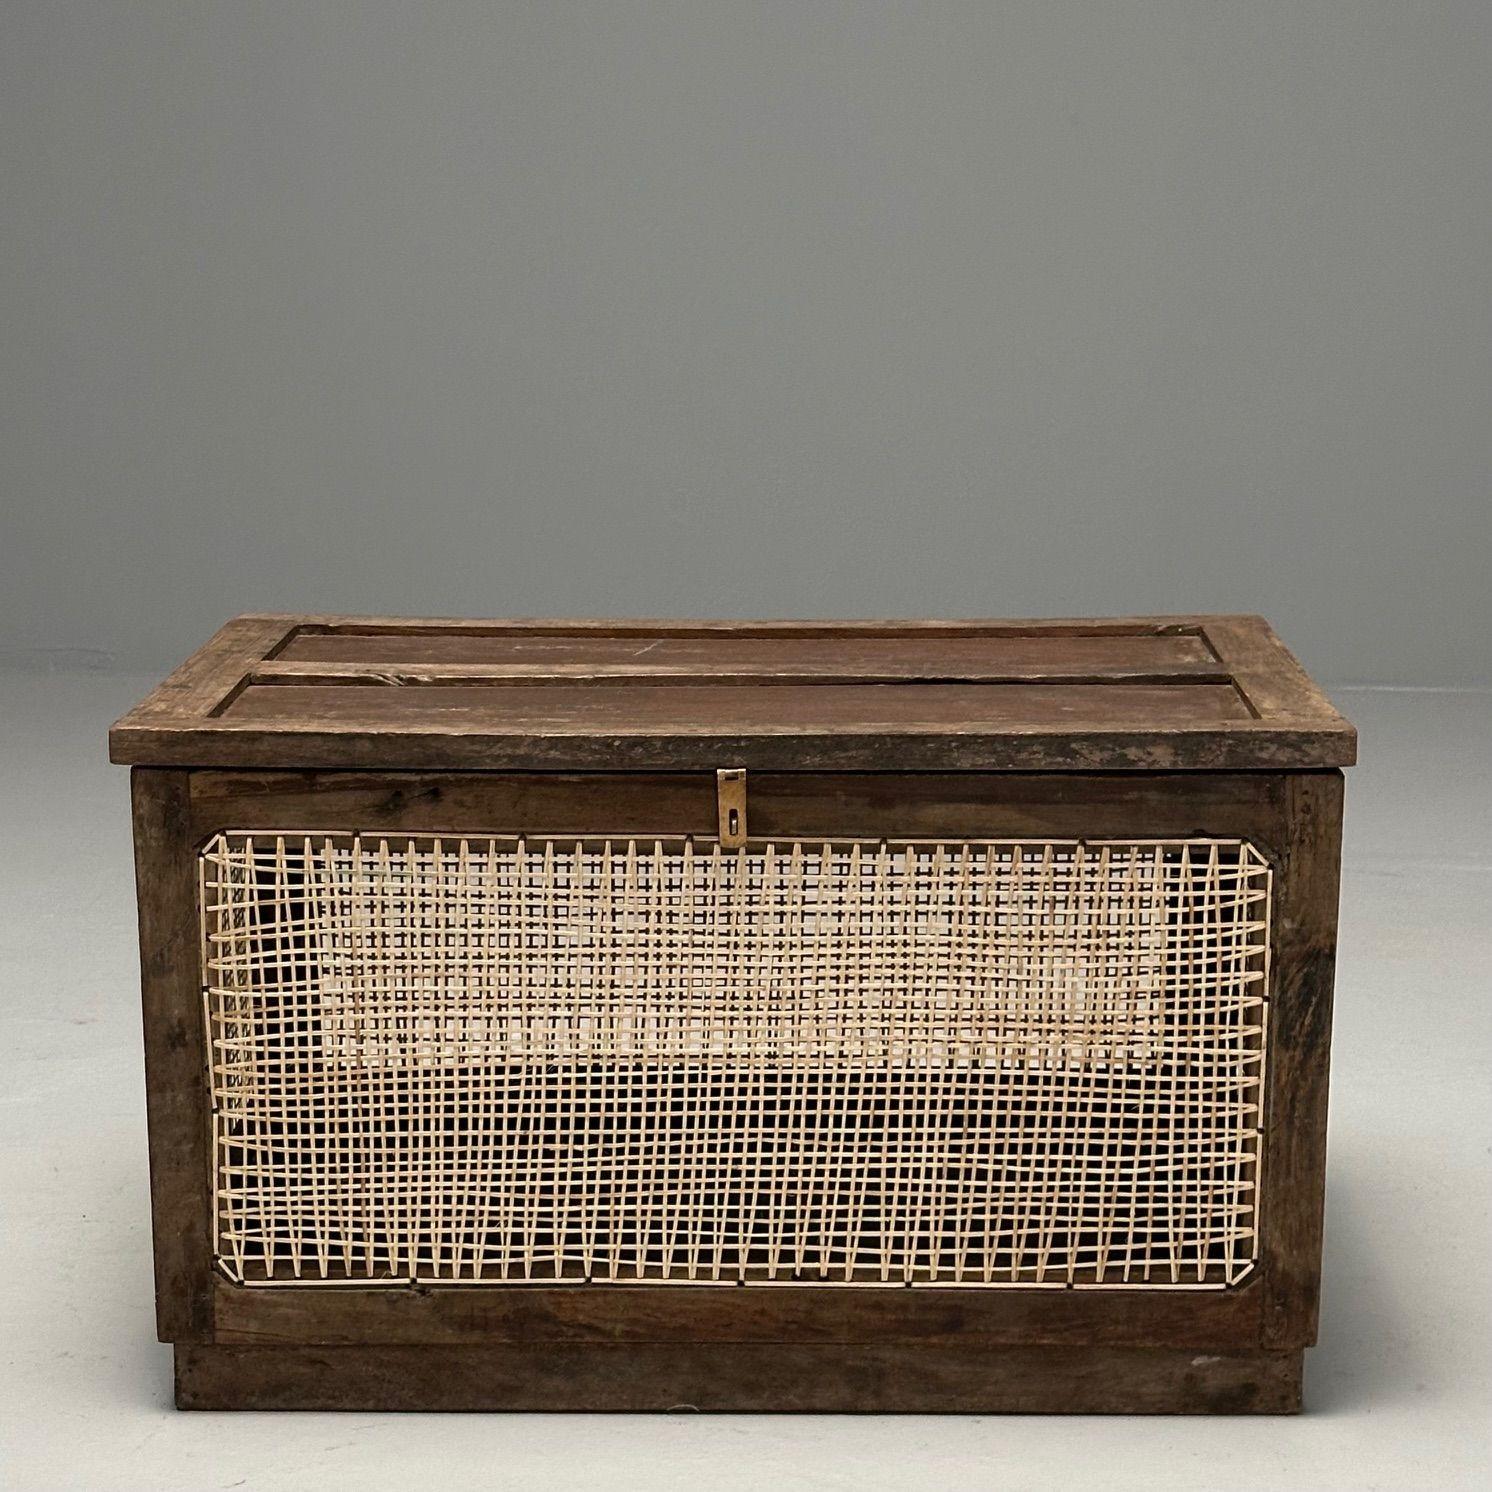 Pierre Jeanneret, French Mid-Century Modern, Dirty Linen Basket, Cane, Teak, Chandigarh, India c. 1960s

Rare 'Dirty Linen' box designed by Pierre Jeanneret for Chandigarh, India. This piece can also be used as a side table or coffee table in